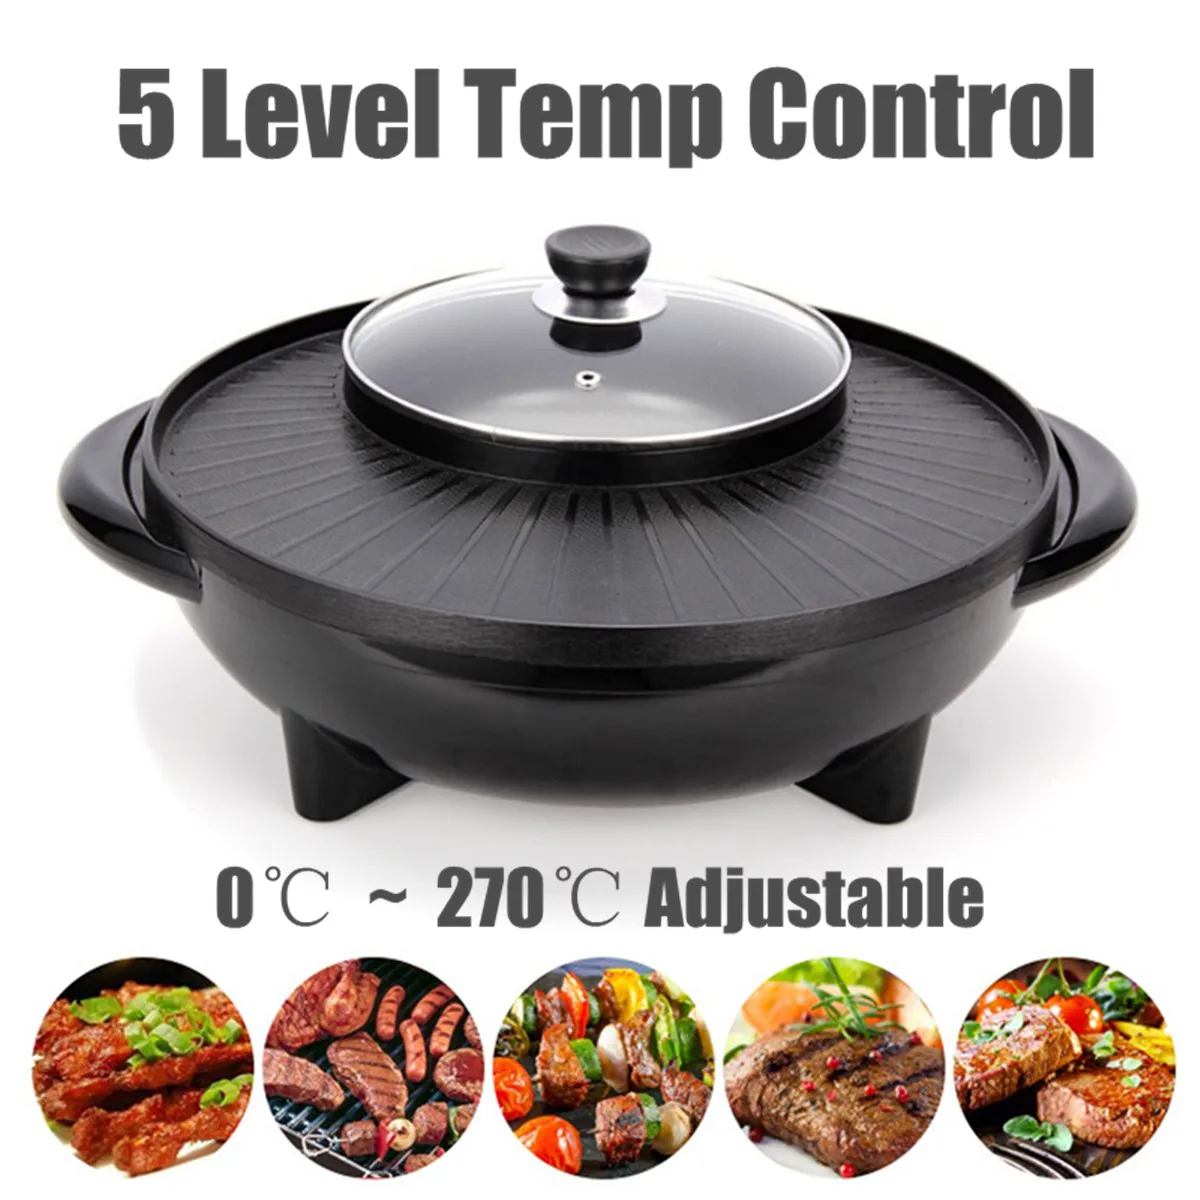 

1500W 220V Multifunctional Electric BBQ Grill Non Stick Plate Barbecue Pan Hot Pot Dinner Party Picnic Skillet Maker 2-8 People